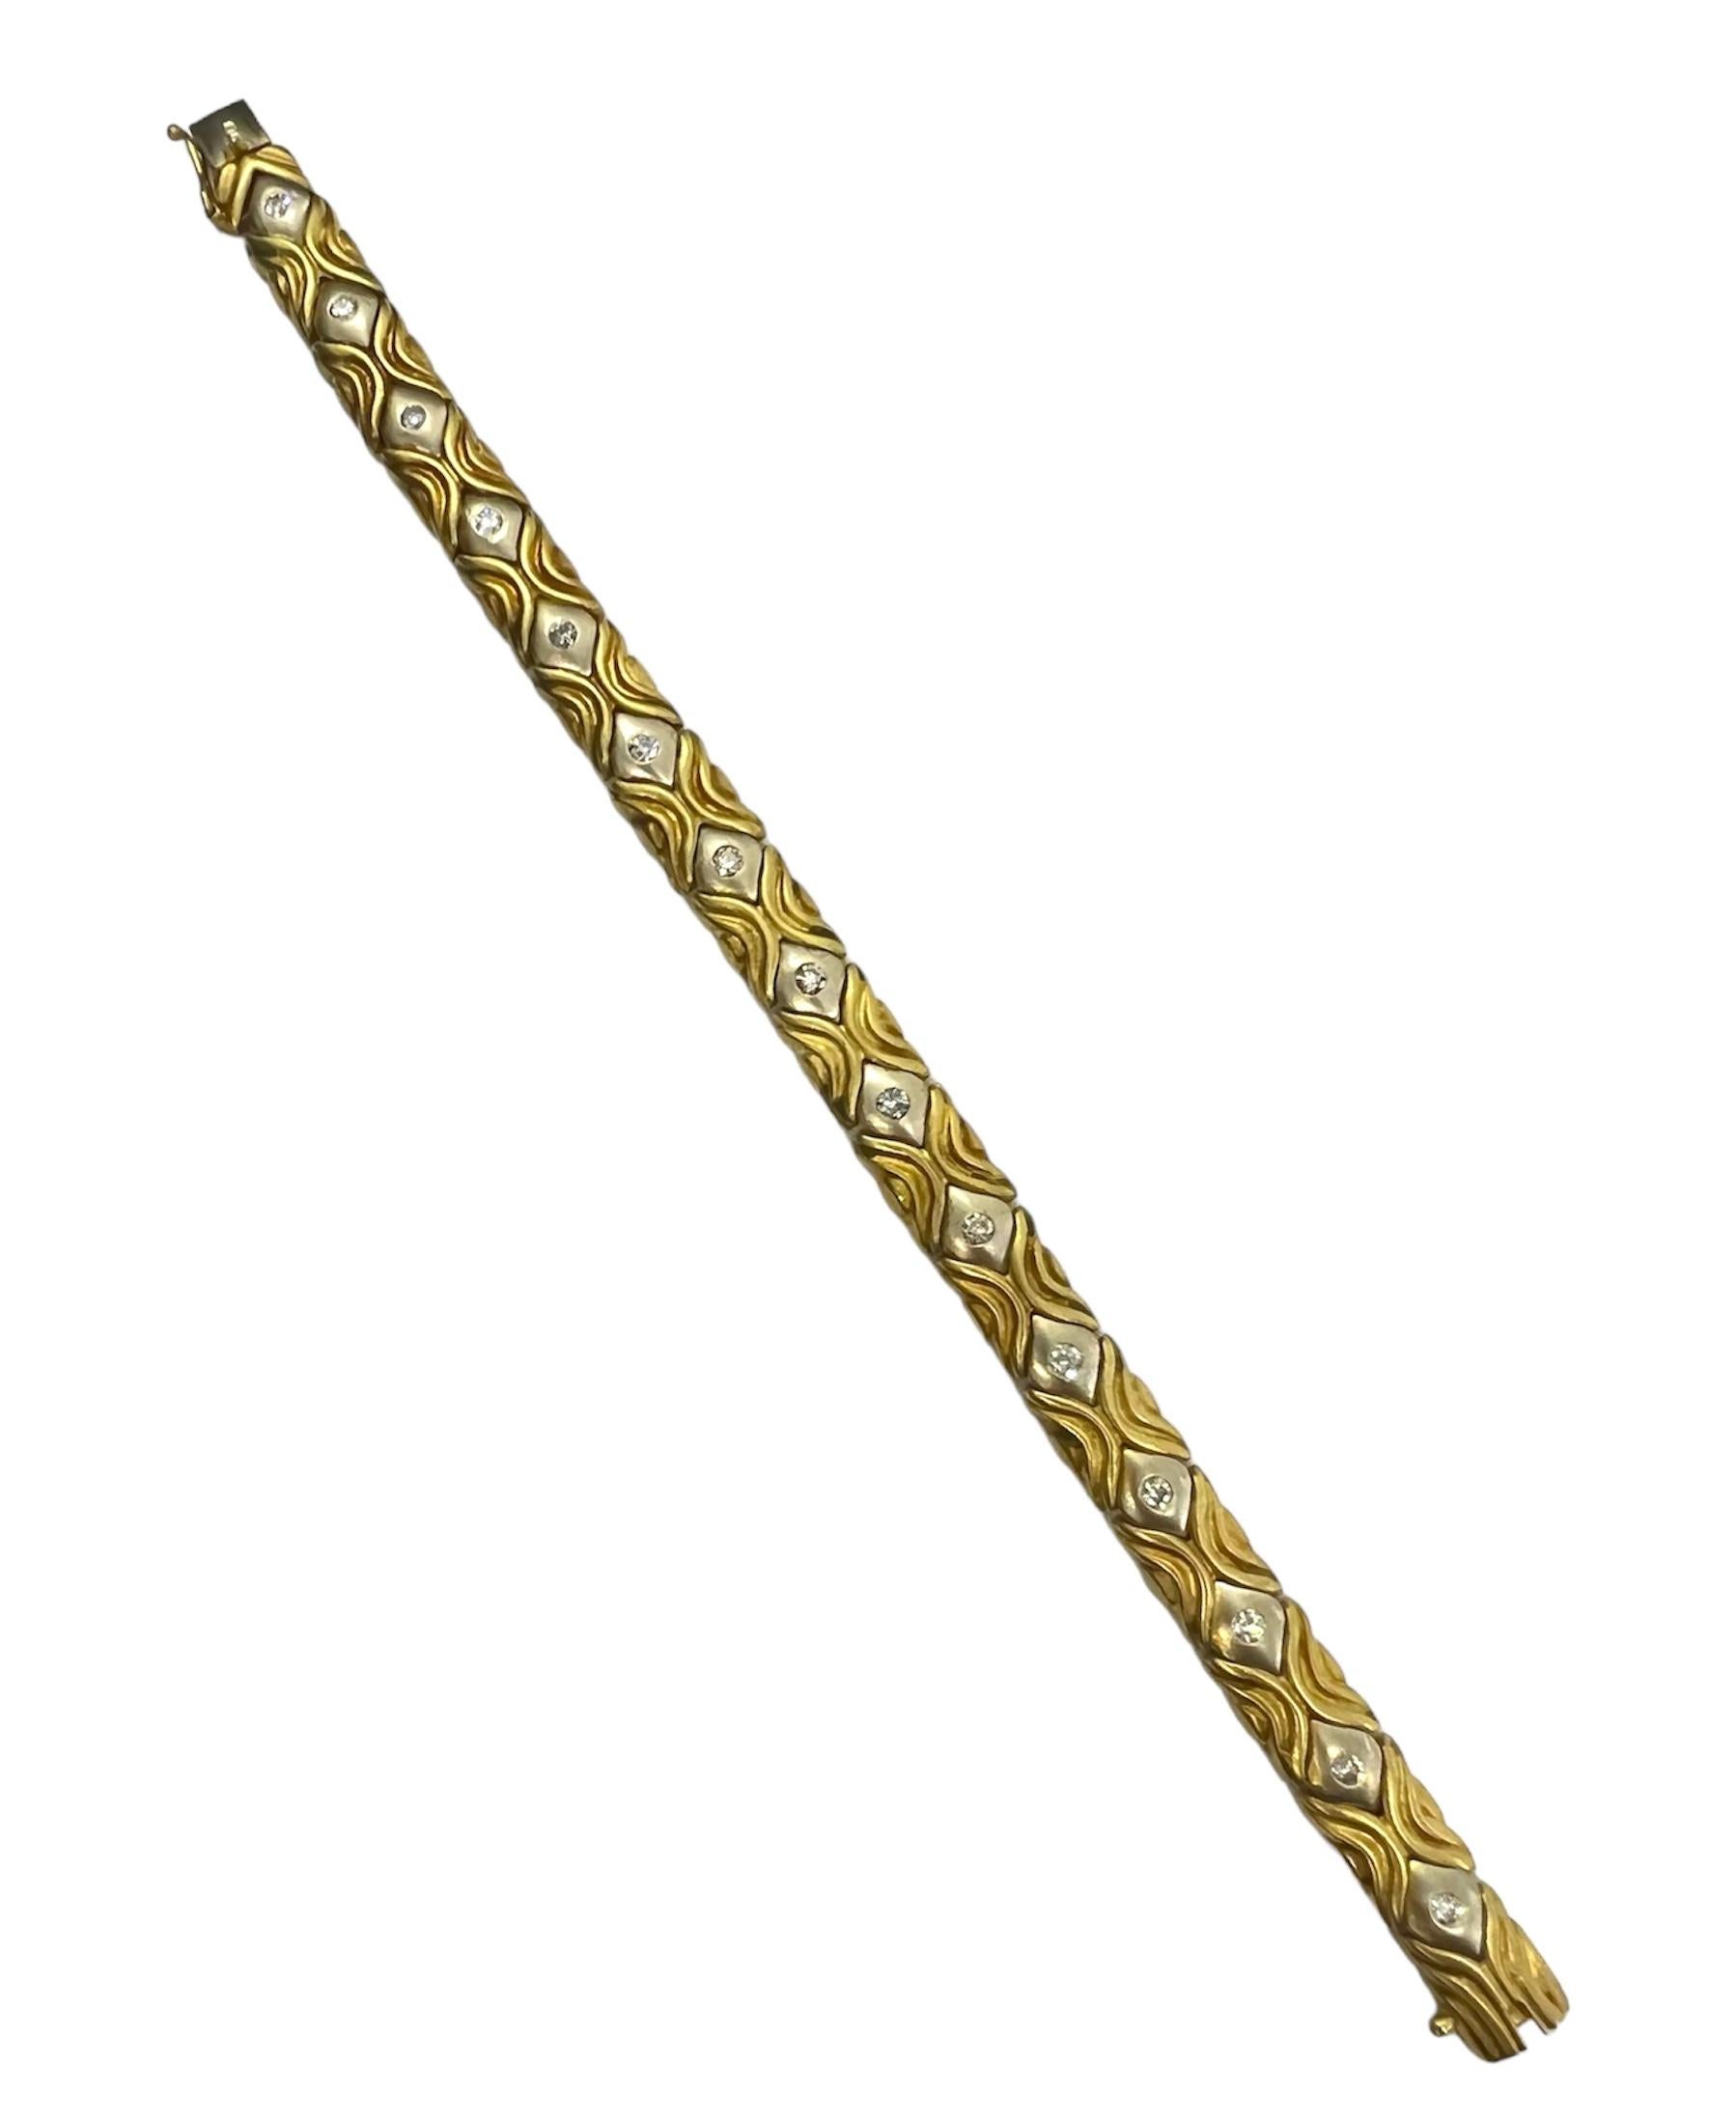 14K yellow gold and white gold bracelet with diamonds.

Sophia D by Joseph Dardashti LTD has been known worldwide for 35 years and are inspired by classic Art Deco design that merges with modern manufacturing techniques.
